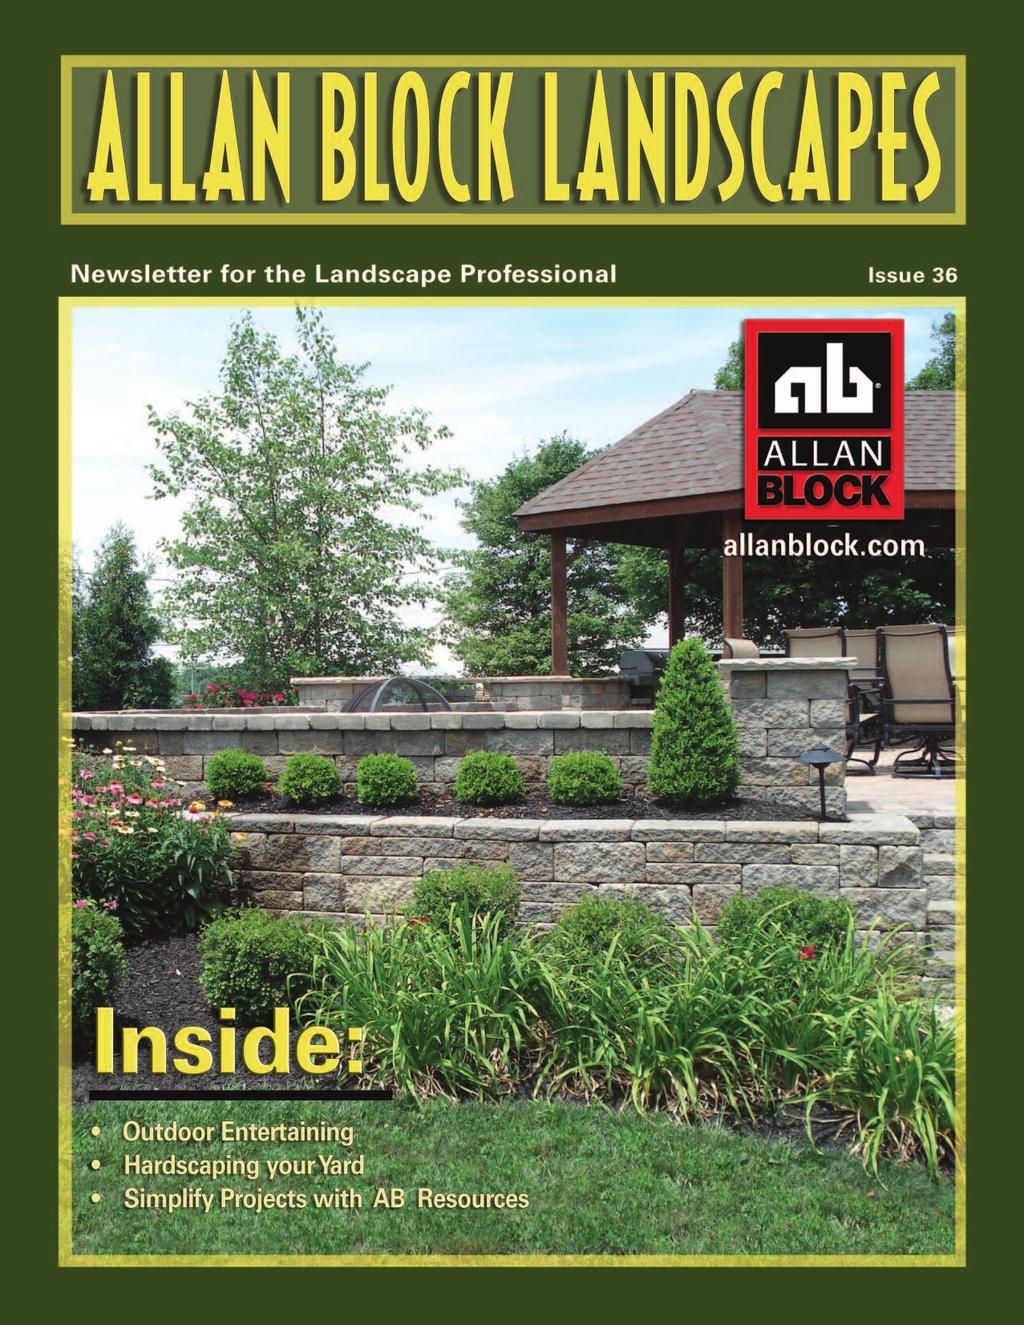 Why Allan Block? Check Us Out! Do You Have a Tablet or Smart Phone? Allan Block Has It All! Allan Block has materials for your tablet or smart phone as well!